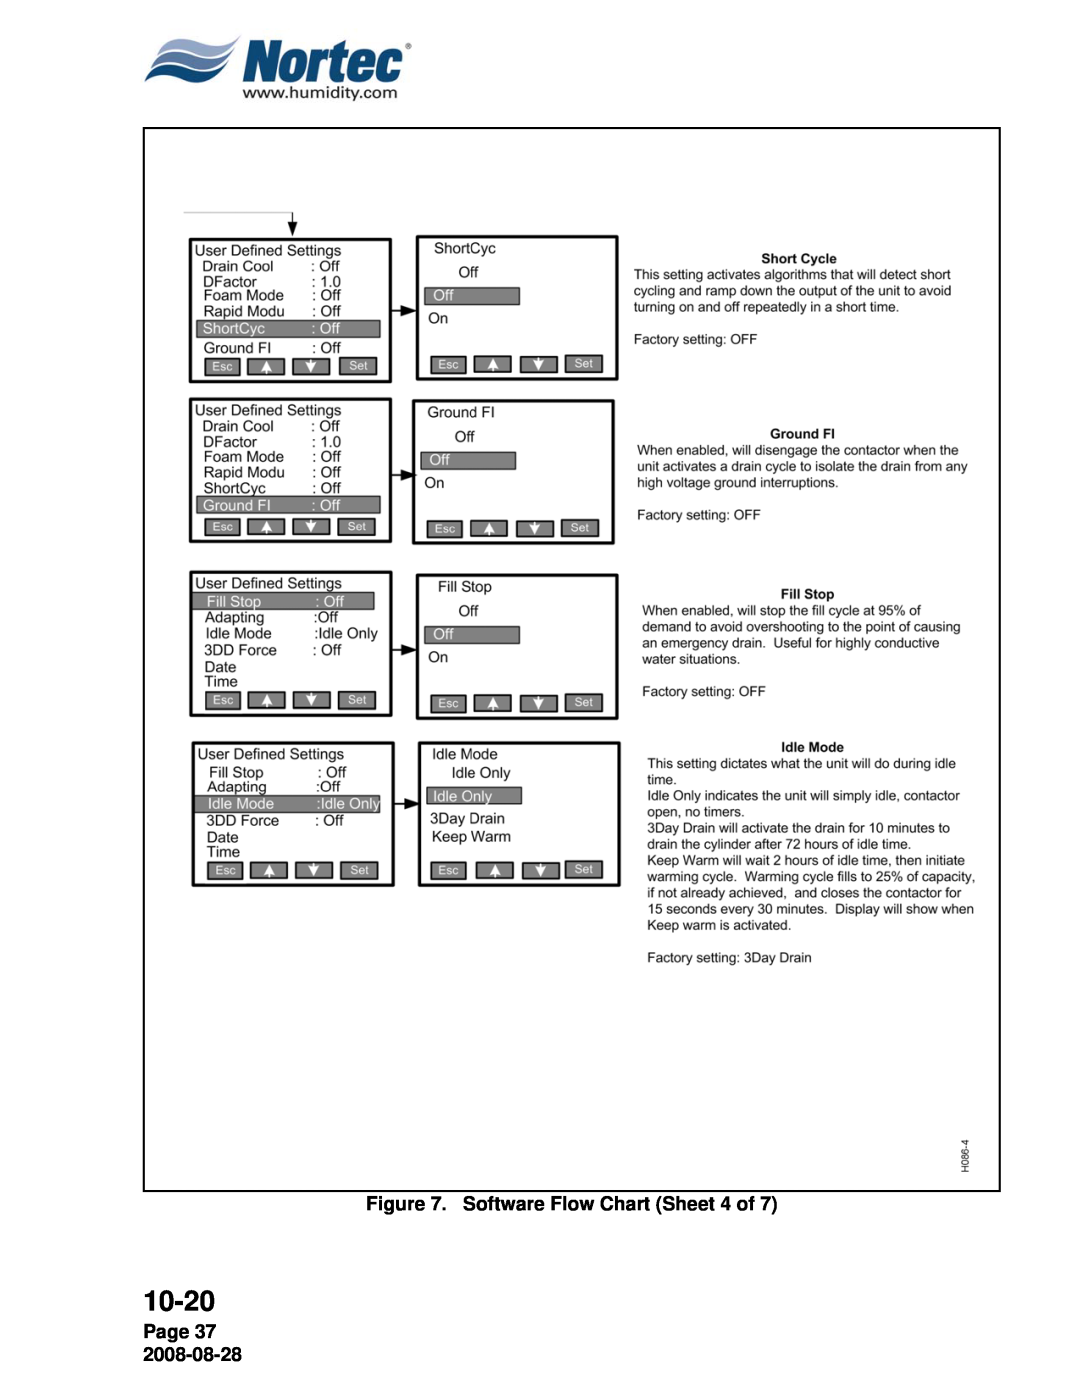 Nortec NH Series installation manual Software Flow Chart Sheet 4 of, Page 37, 10-20 